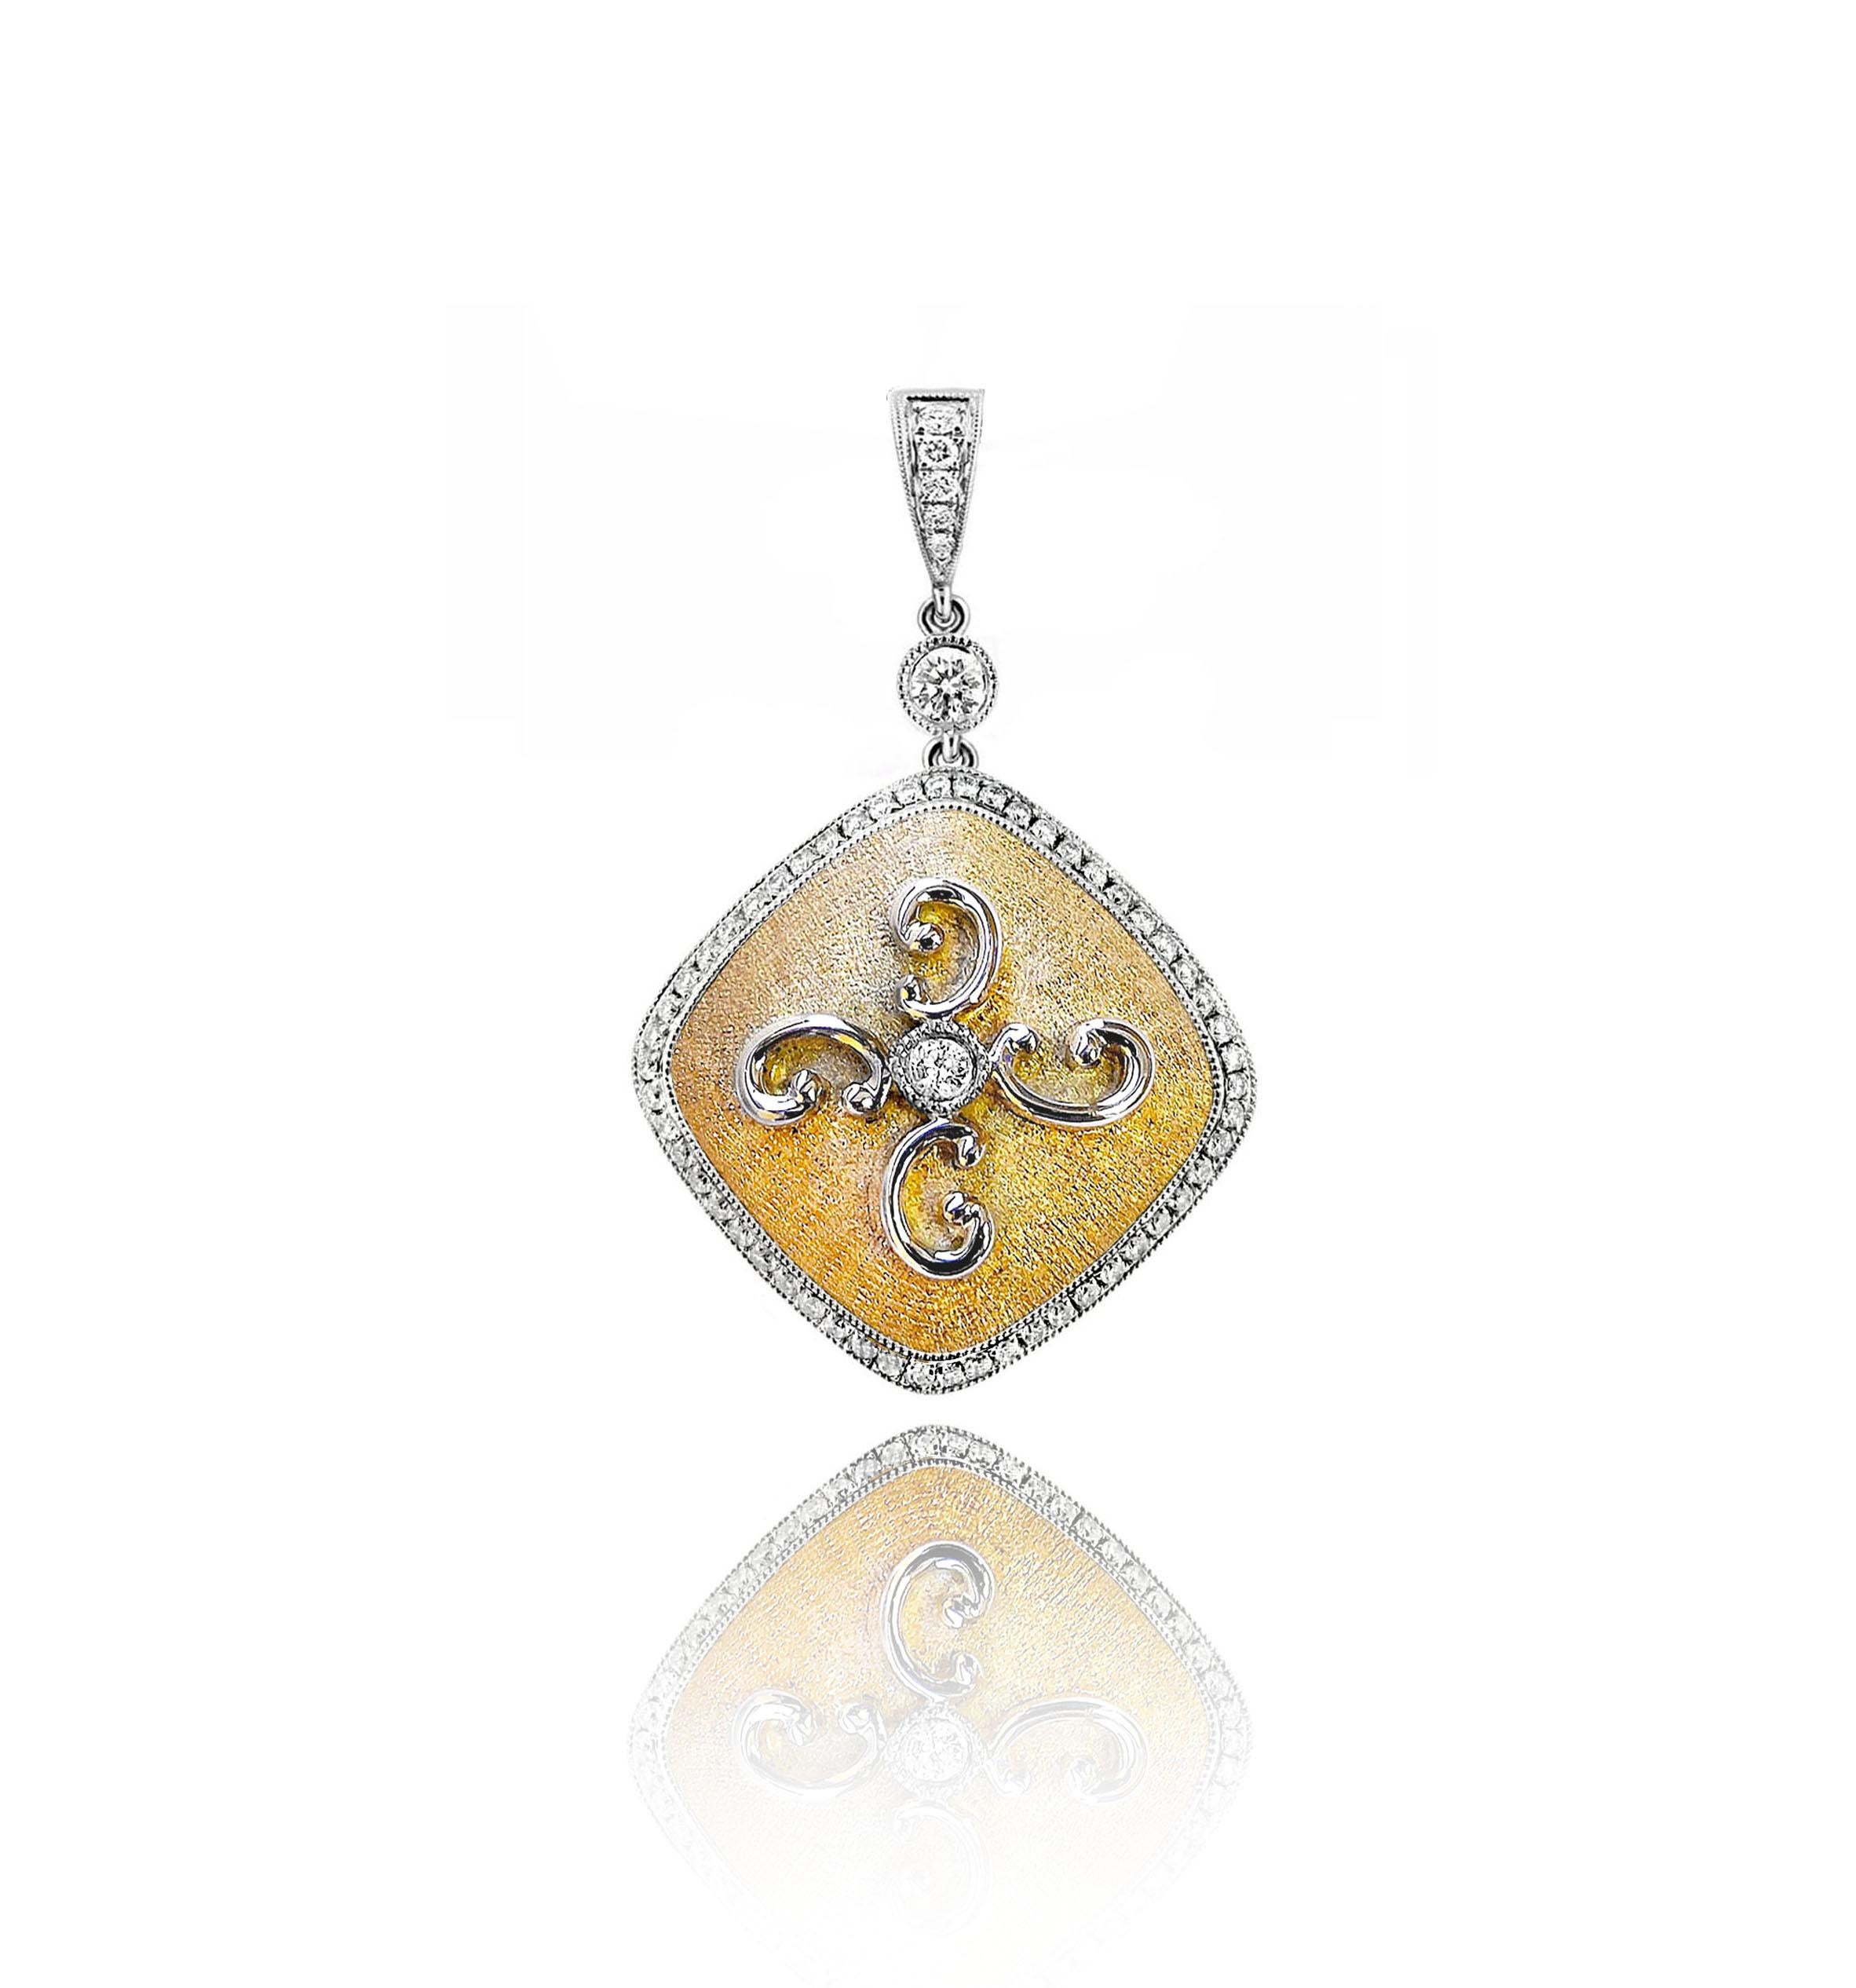 Produced by award winning Italian designer Stefano Vitolo. Stefano creates custom artisanal one of a kind jewelry with excellent gemstones in a truly old world Italian craftmanship.

This handcrafted pendant has 0.47 total carat weight of F/G color,